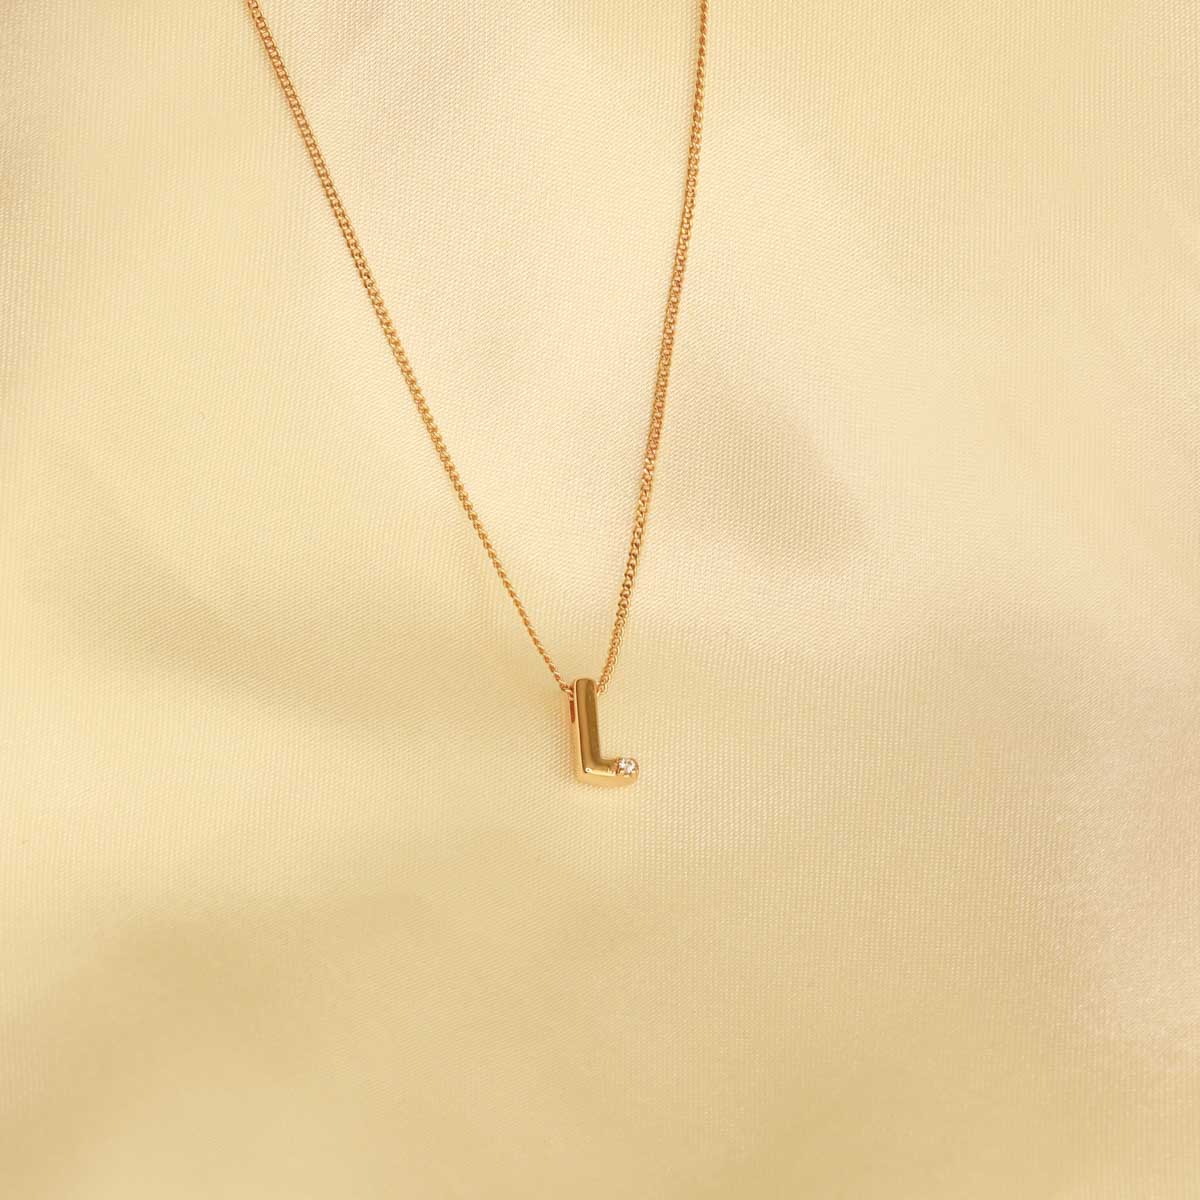 Flat lay shot of L Initial Pendant Necklace in Gold